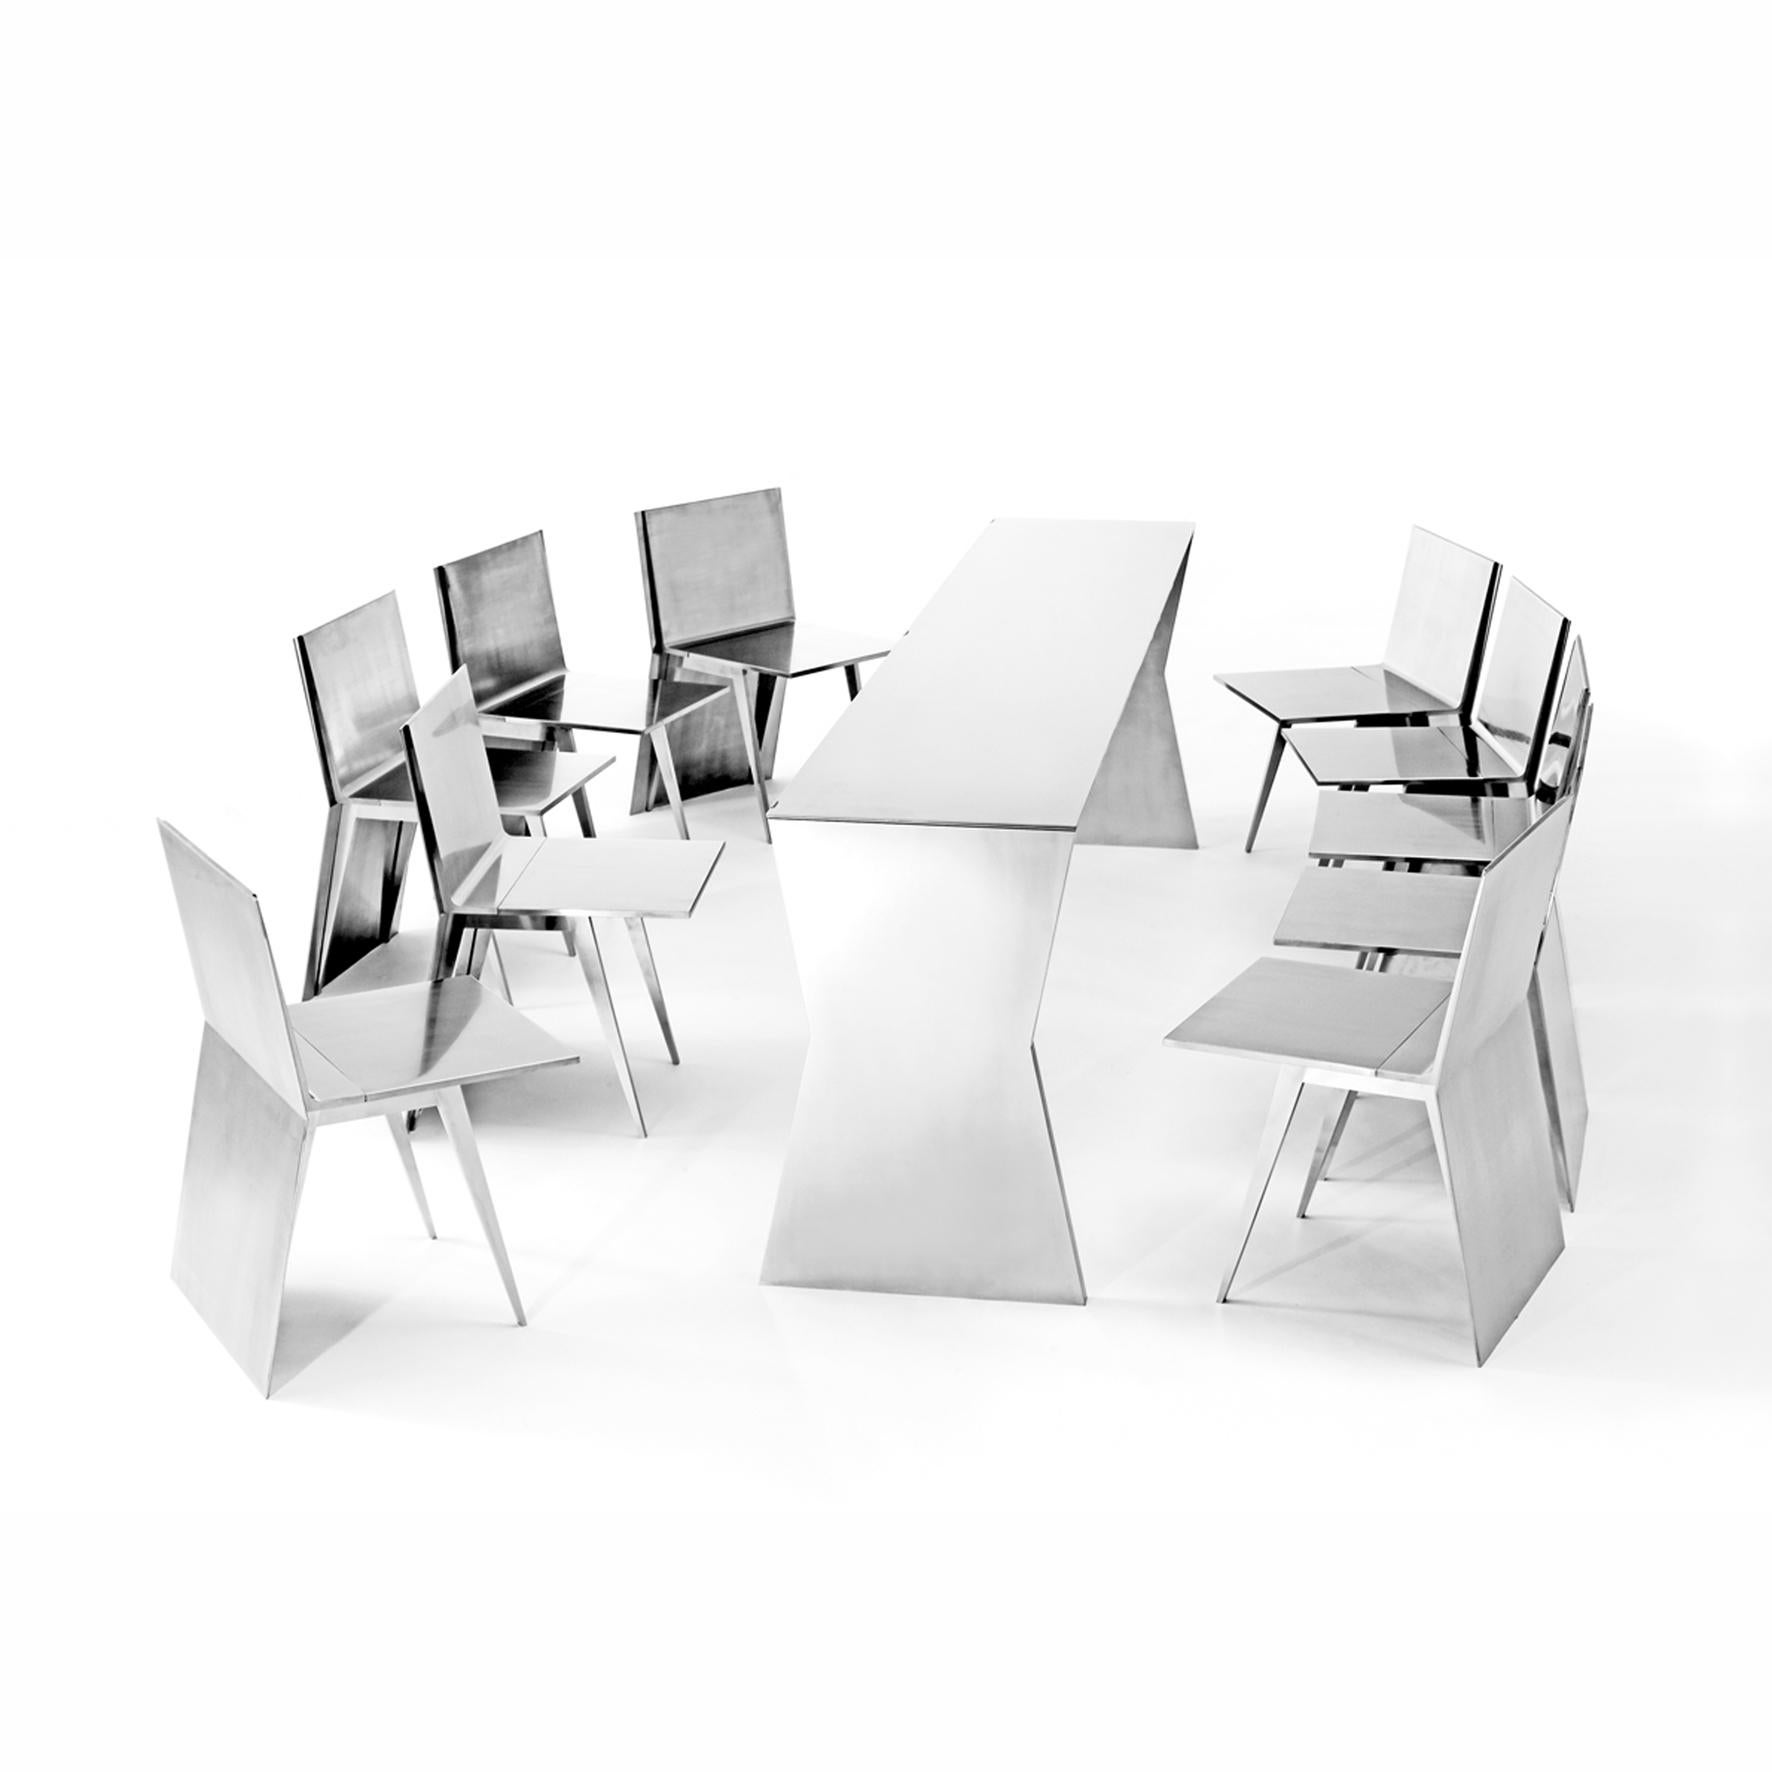 Gioia Meller Marcovicz
 
The Monolith
 
A stainless steel dining ensemble composed of a folding x-shaped profiled table and ten folding chairs. When nested under the rectangular top, the chairs create a monolithic block. 
 
This extraordinary